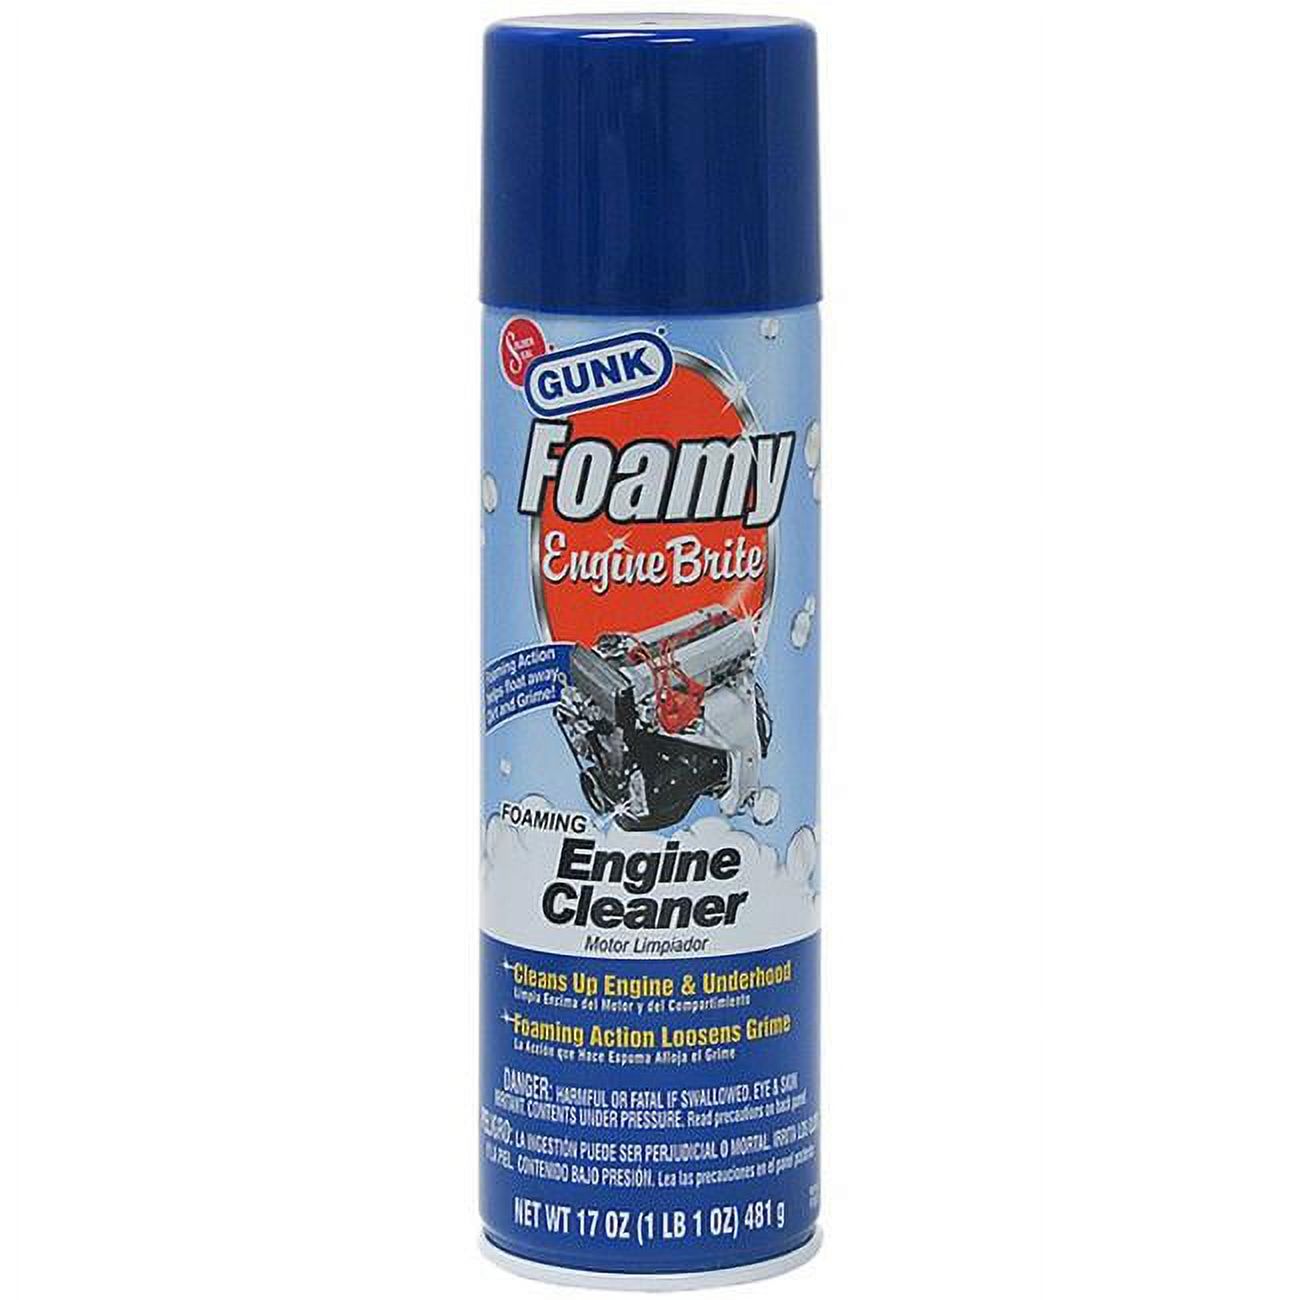 GUNK Low VOC Foamy Engine Cleaner and Degreaser, 17 oz Aerosol - image 1 of 4